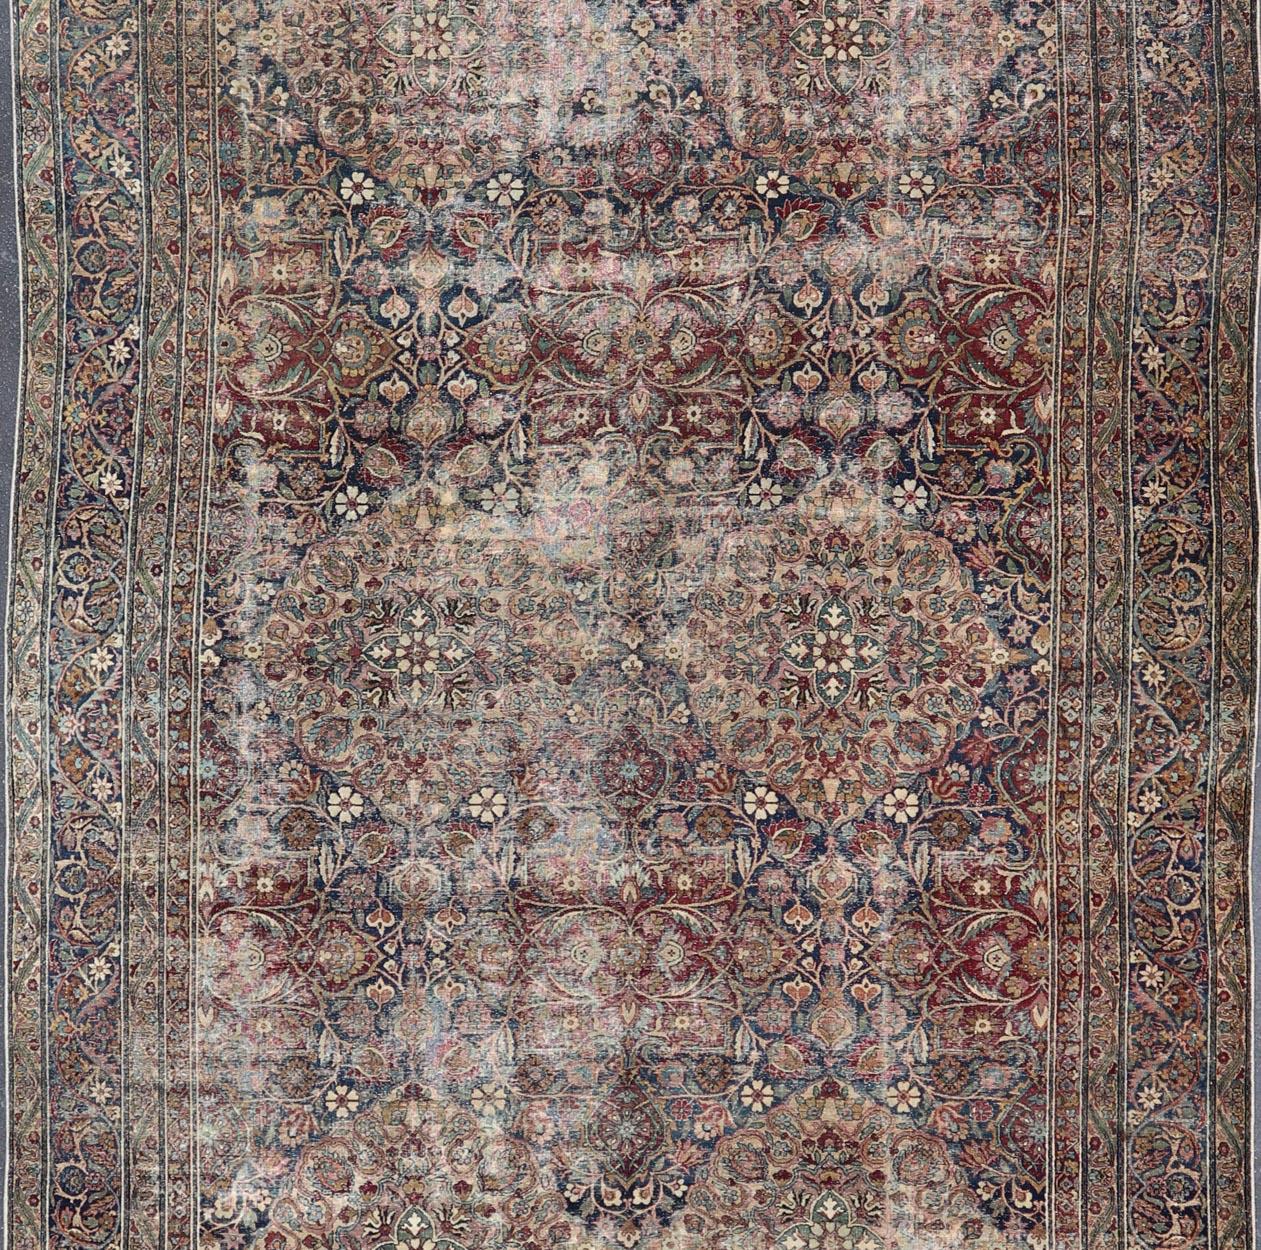 Antique Persian Lavar Kerman Large Gallery Rug with All-Over Floral Design For Sale 6